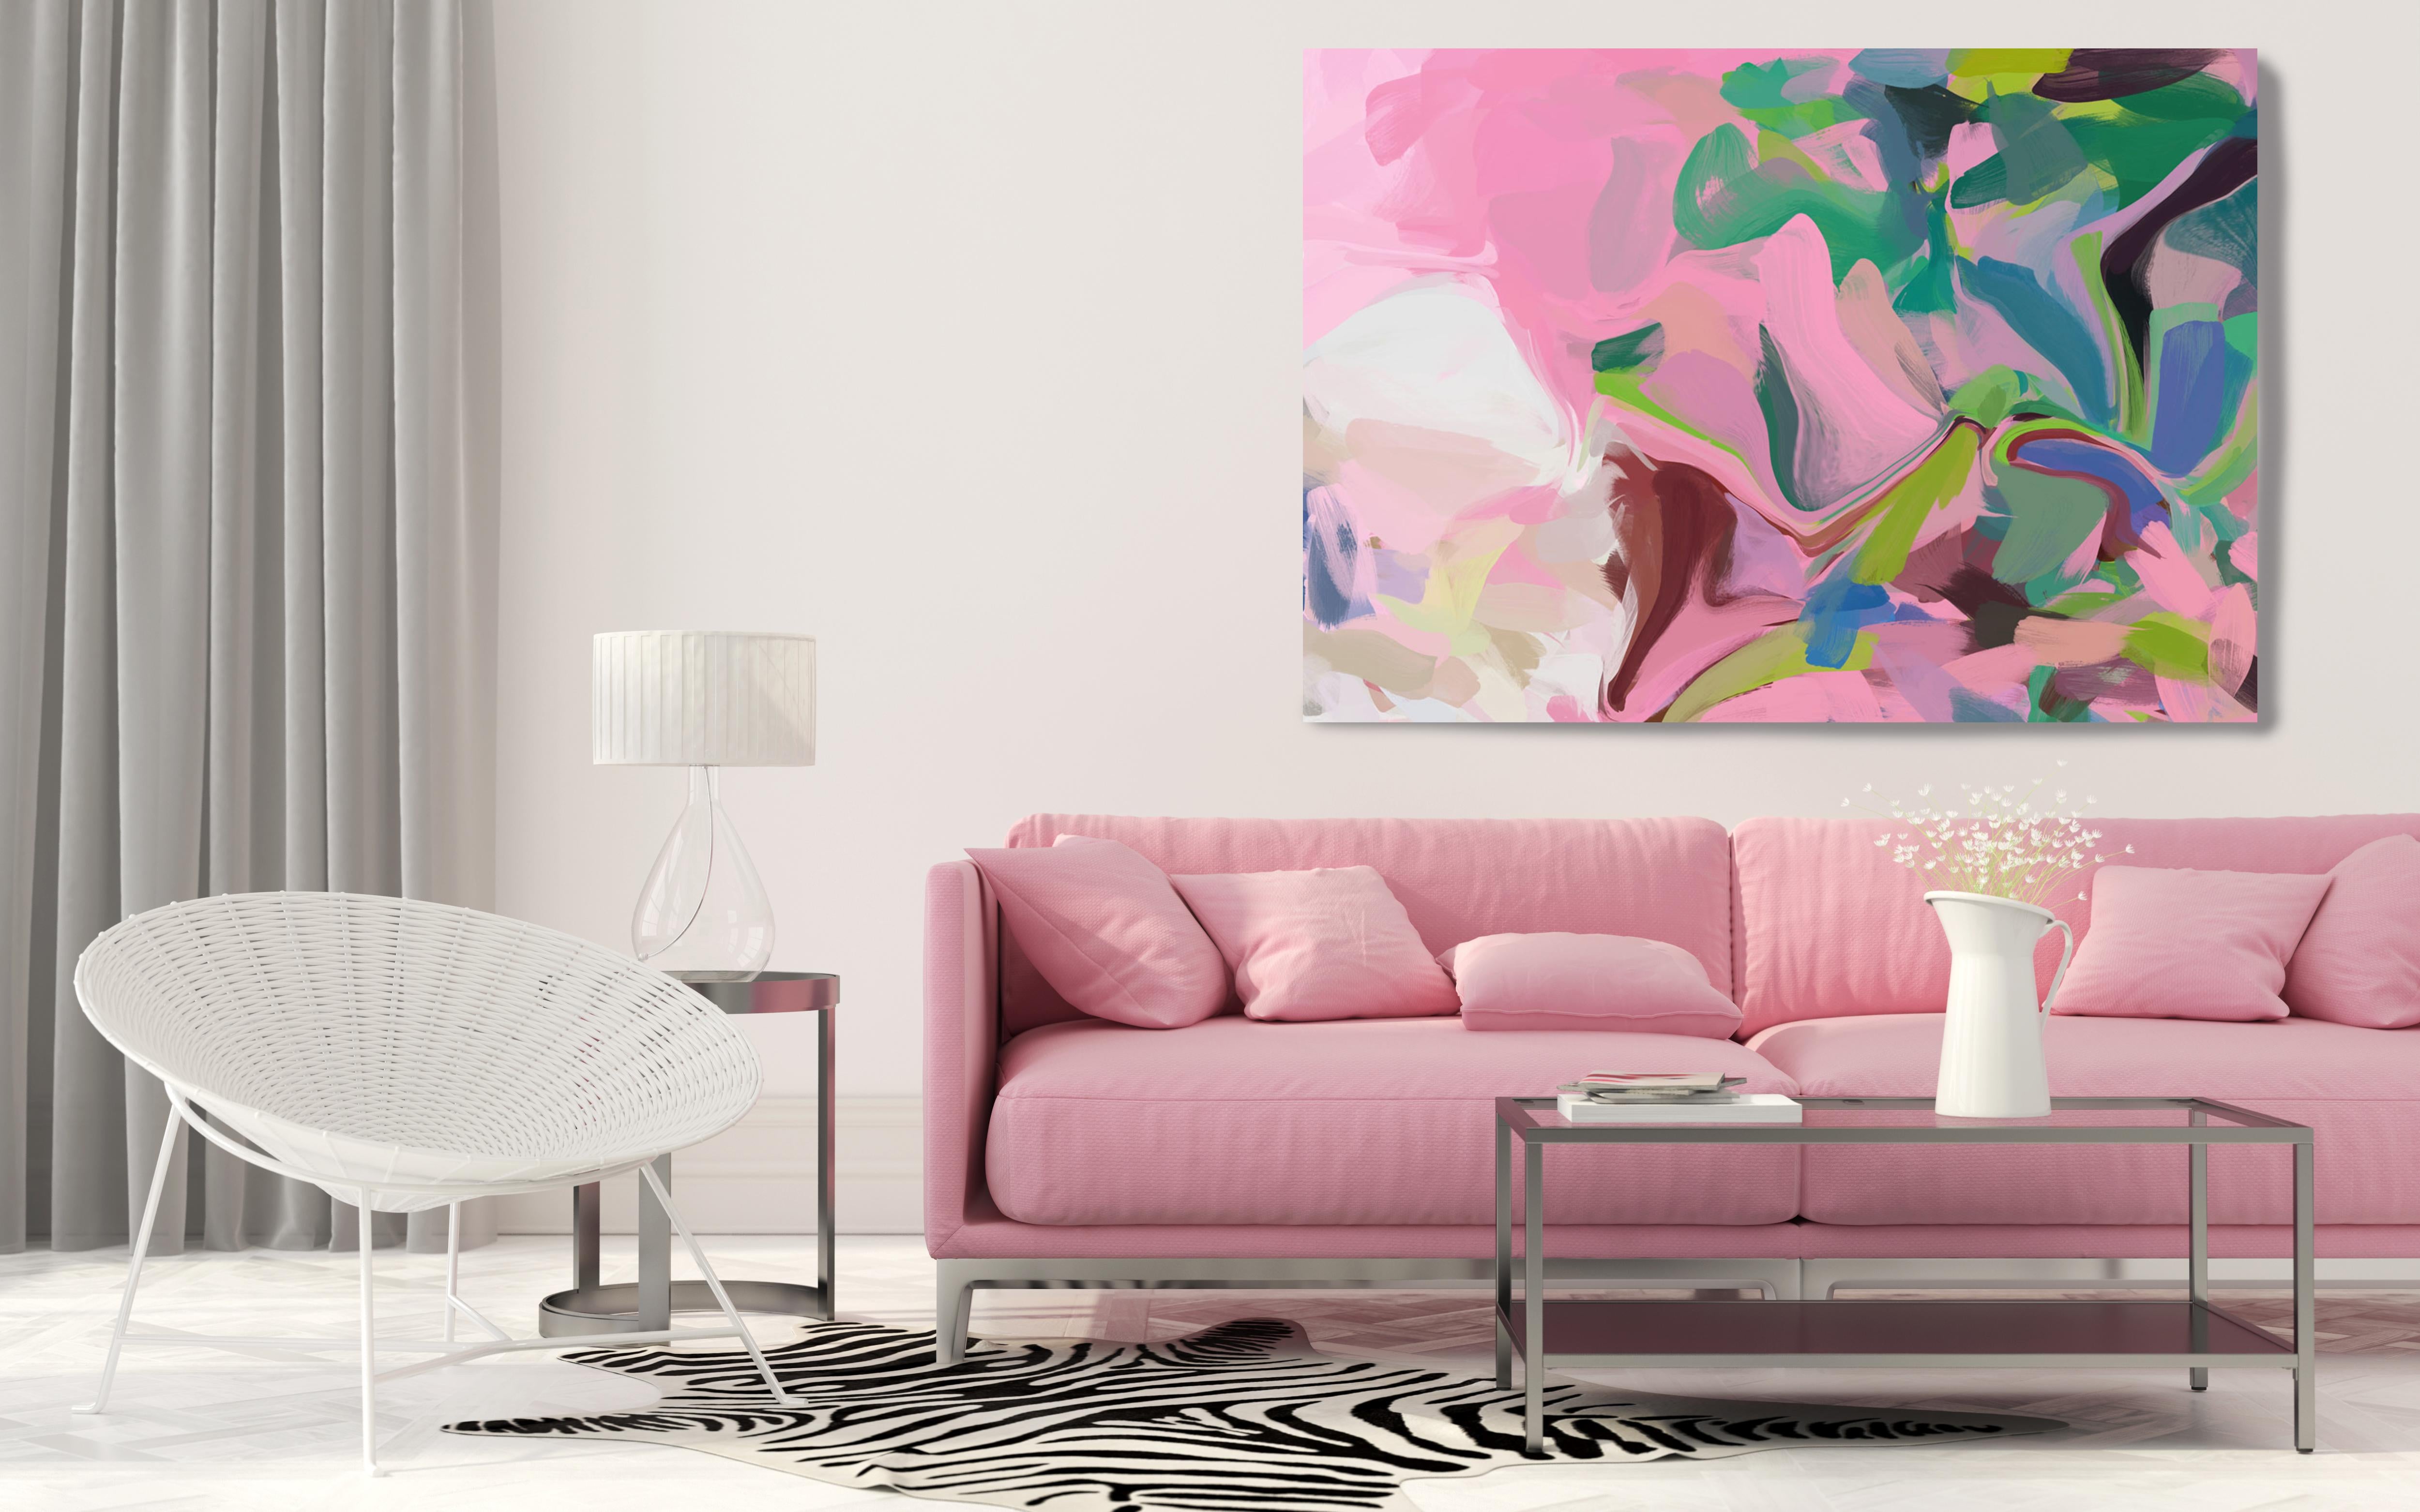 Contemporary Color Burst Abstraction Pink Green Painting Mixed Media Canvas - Mixed Media Art by Irena Orlov